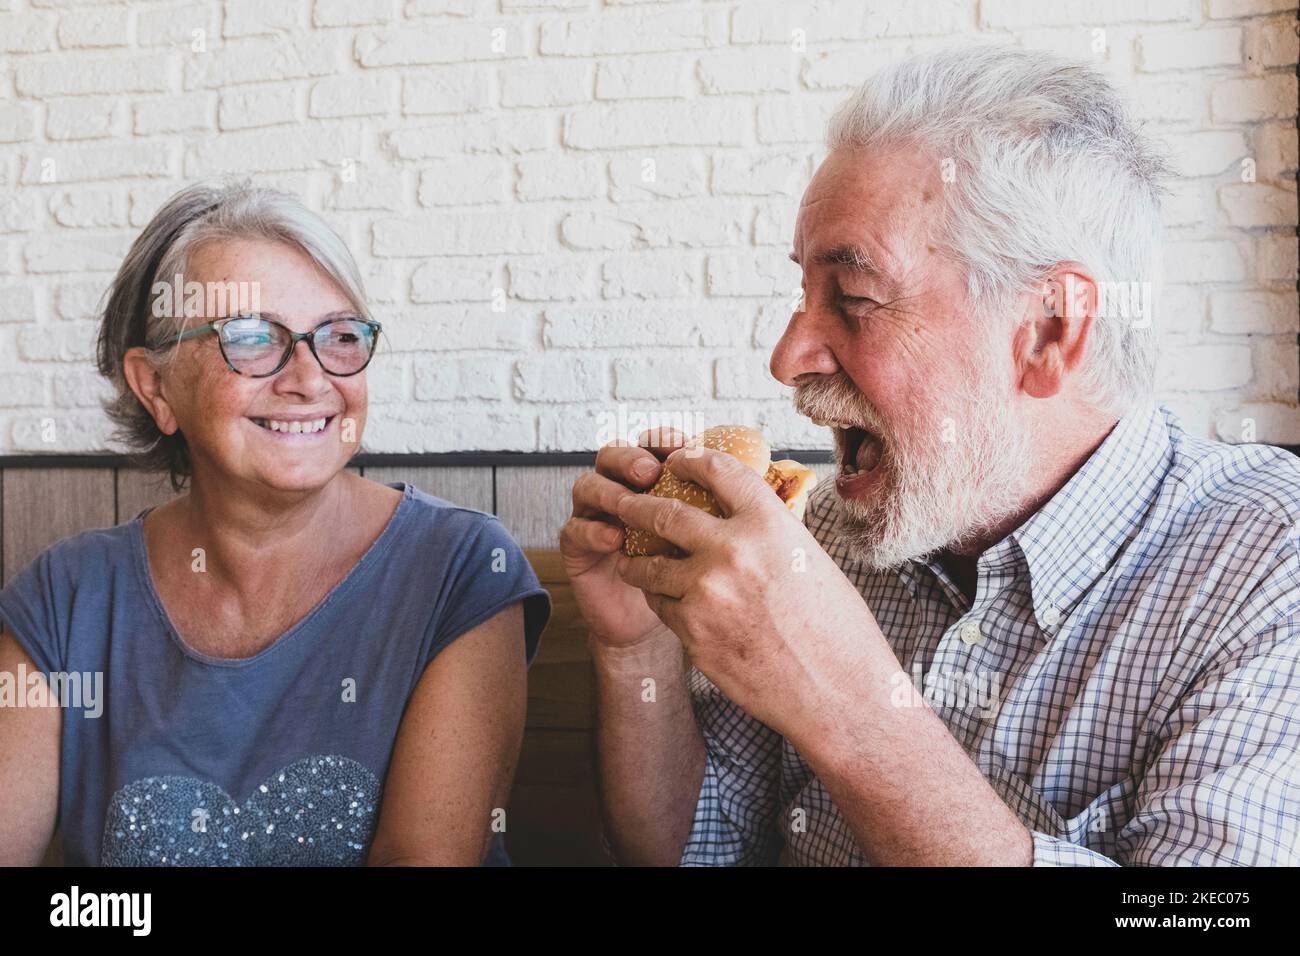 couple of seniors together having fun eating and laughing - mature man holding an hamurger and eating it with mouth opened and his wife looking and smiling Stock Photo